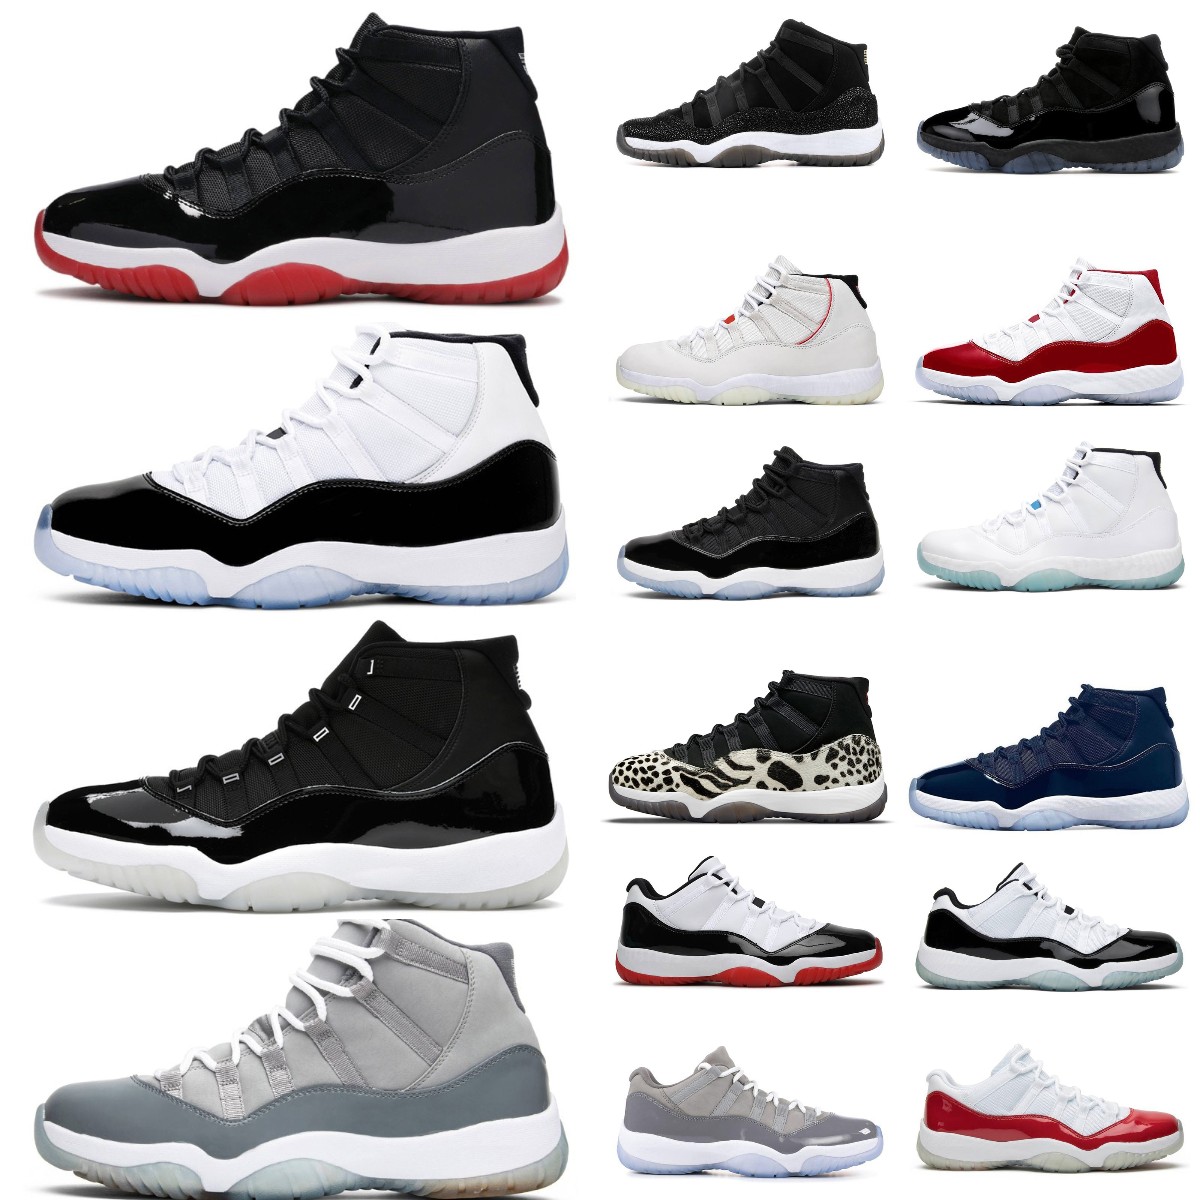 

NEW Mens basketball shoes women 11s 11 Cherry Midnight Navy Cool Grey Concord Bred win like 96 Platinum Tint Bright Citrus UNC Pure Violet men sports sneakers 36-47, Bubble column